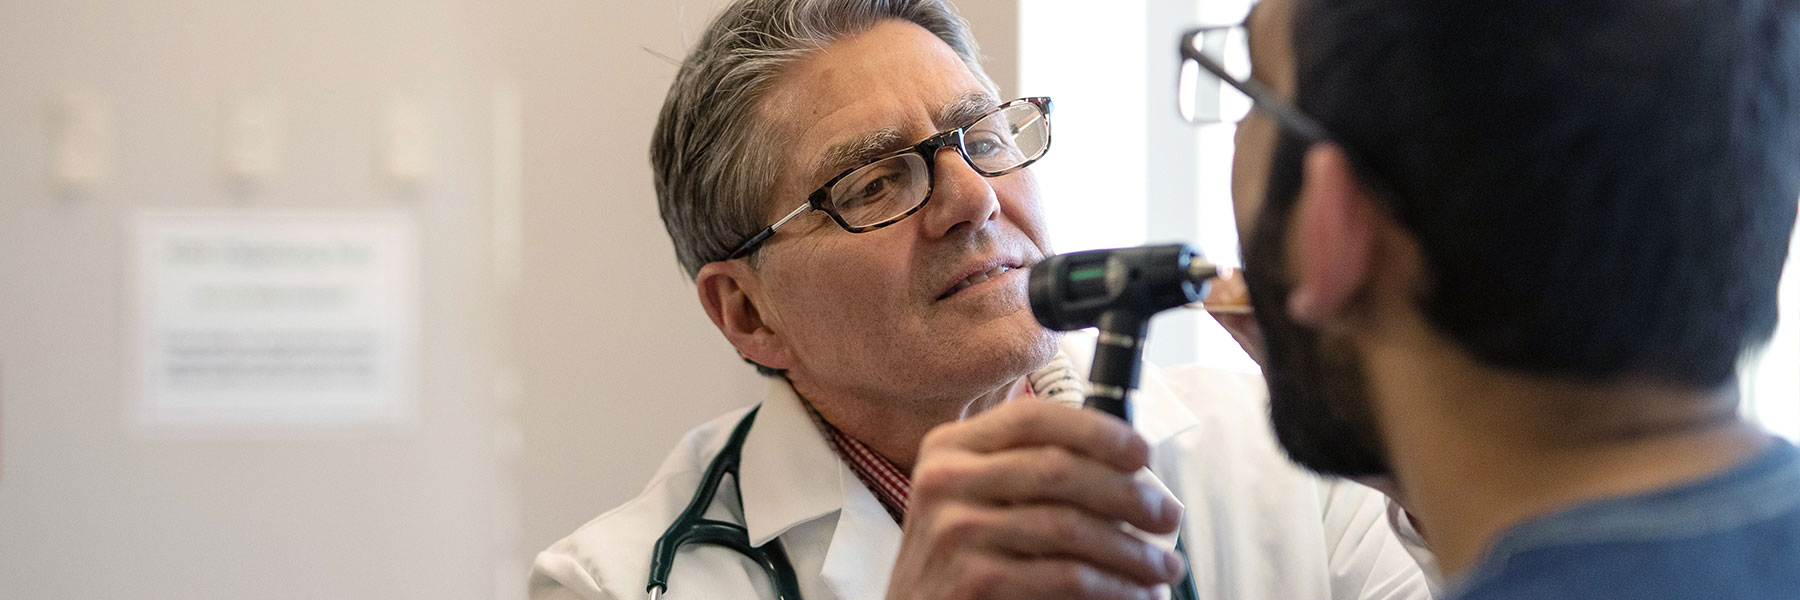 A male doctor holds up otoscope to look in the throat of a patient in front of him.